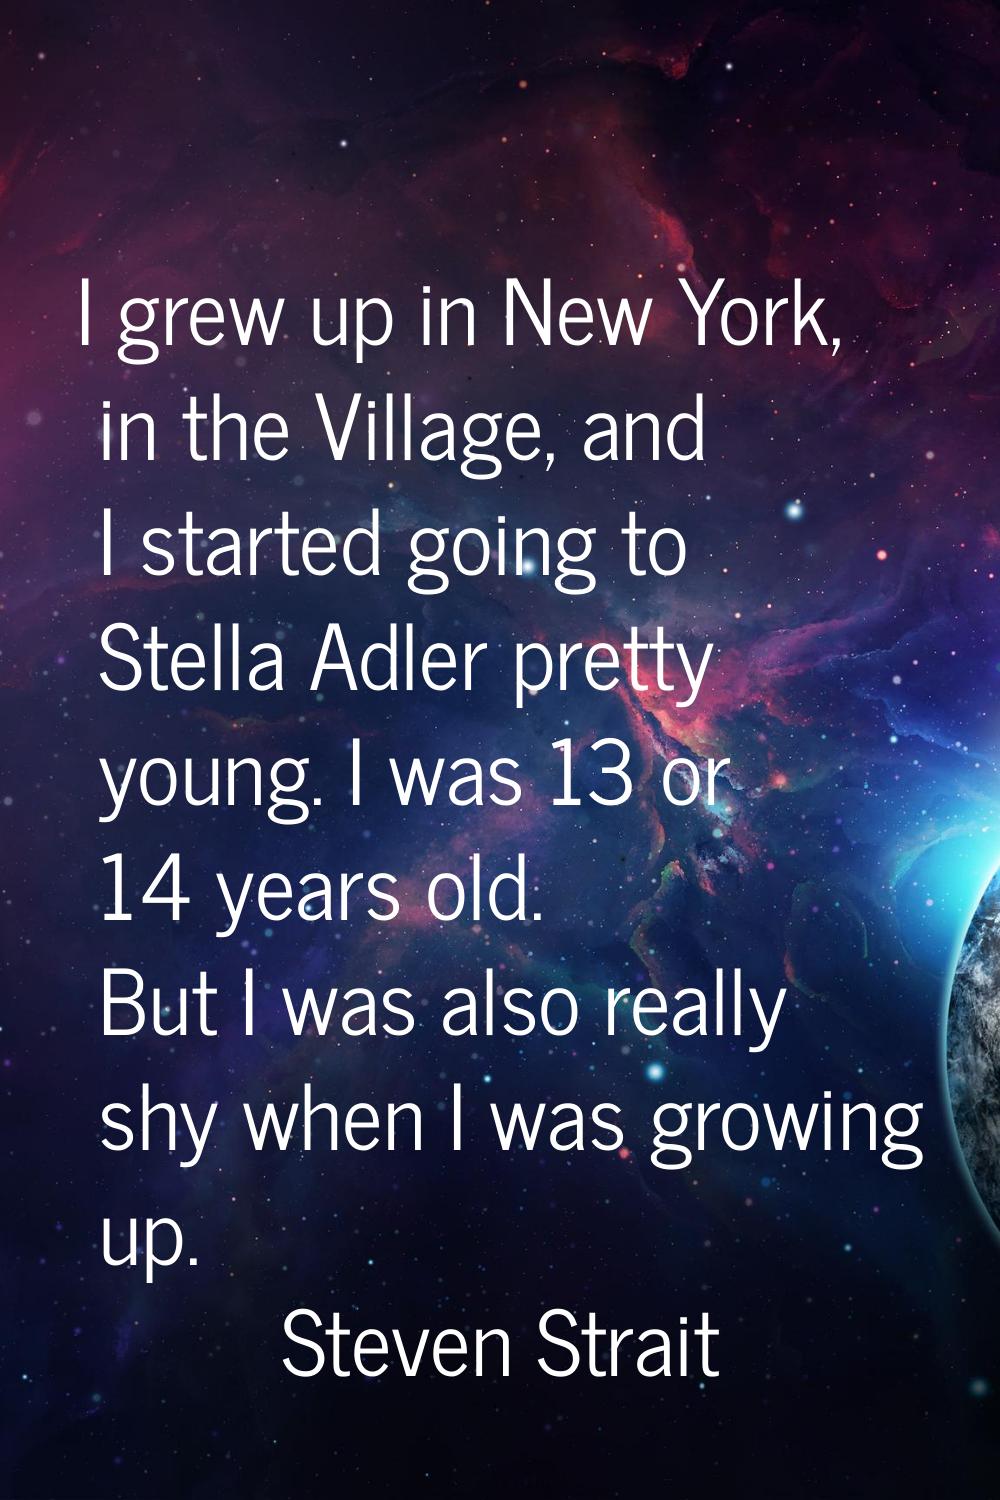 I grew up in New York, in the Village, and I started going to Stella Adler pretty young. I was 13 o